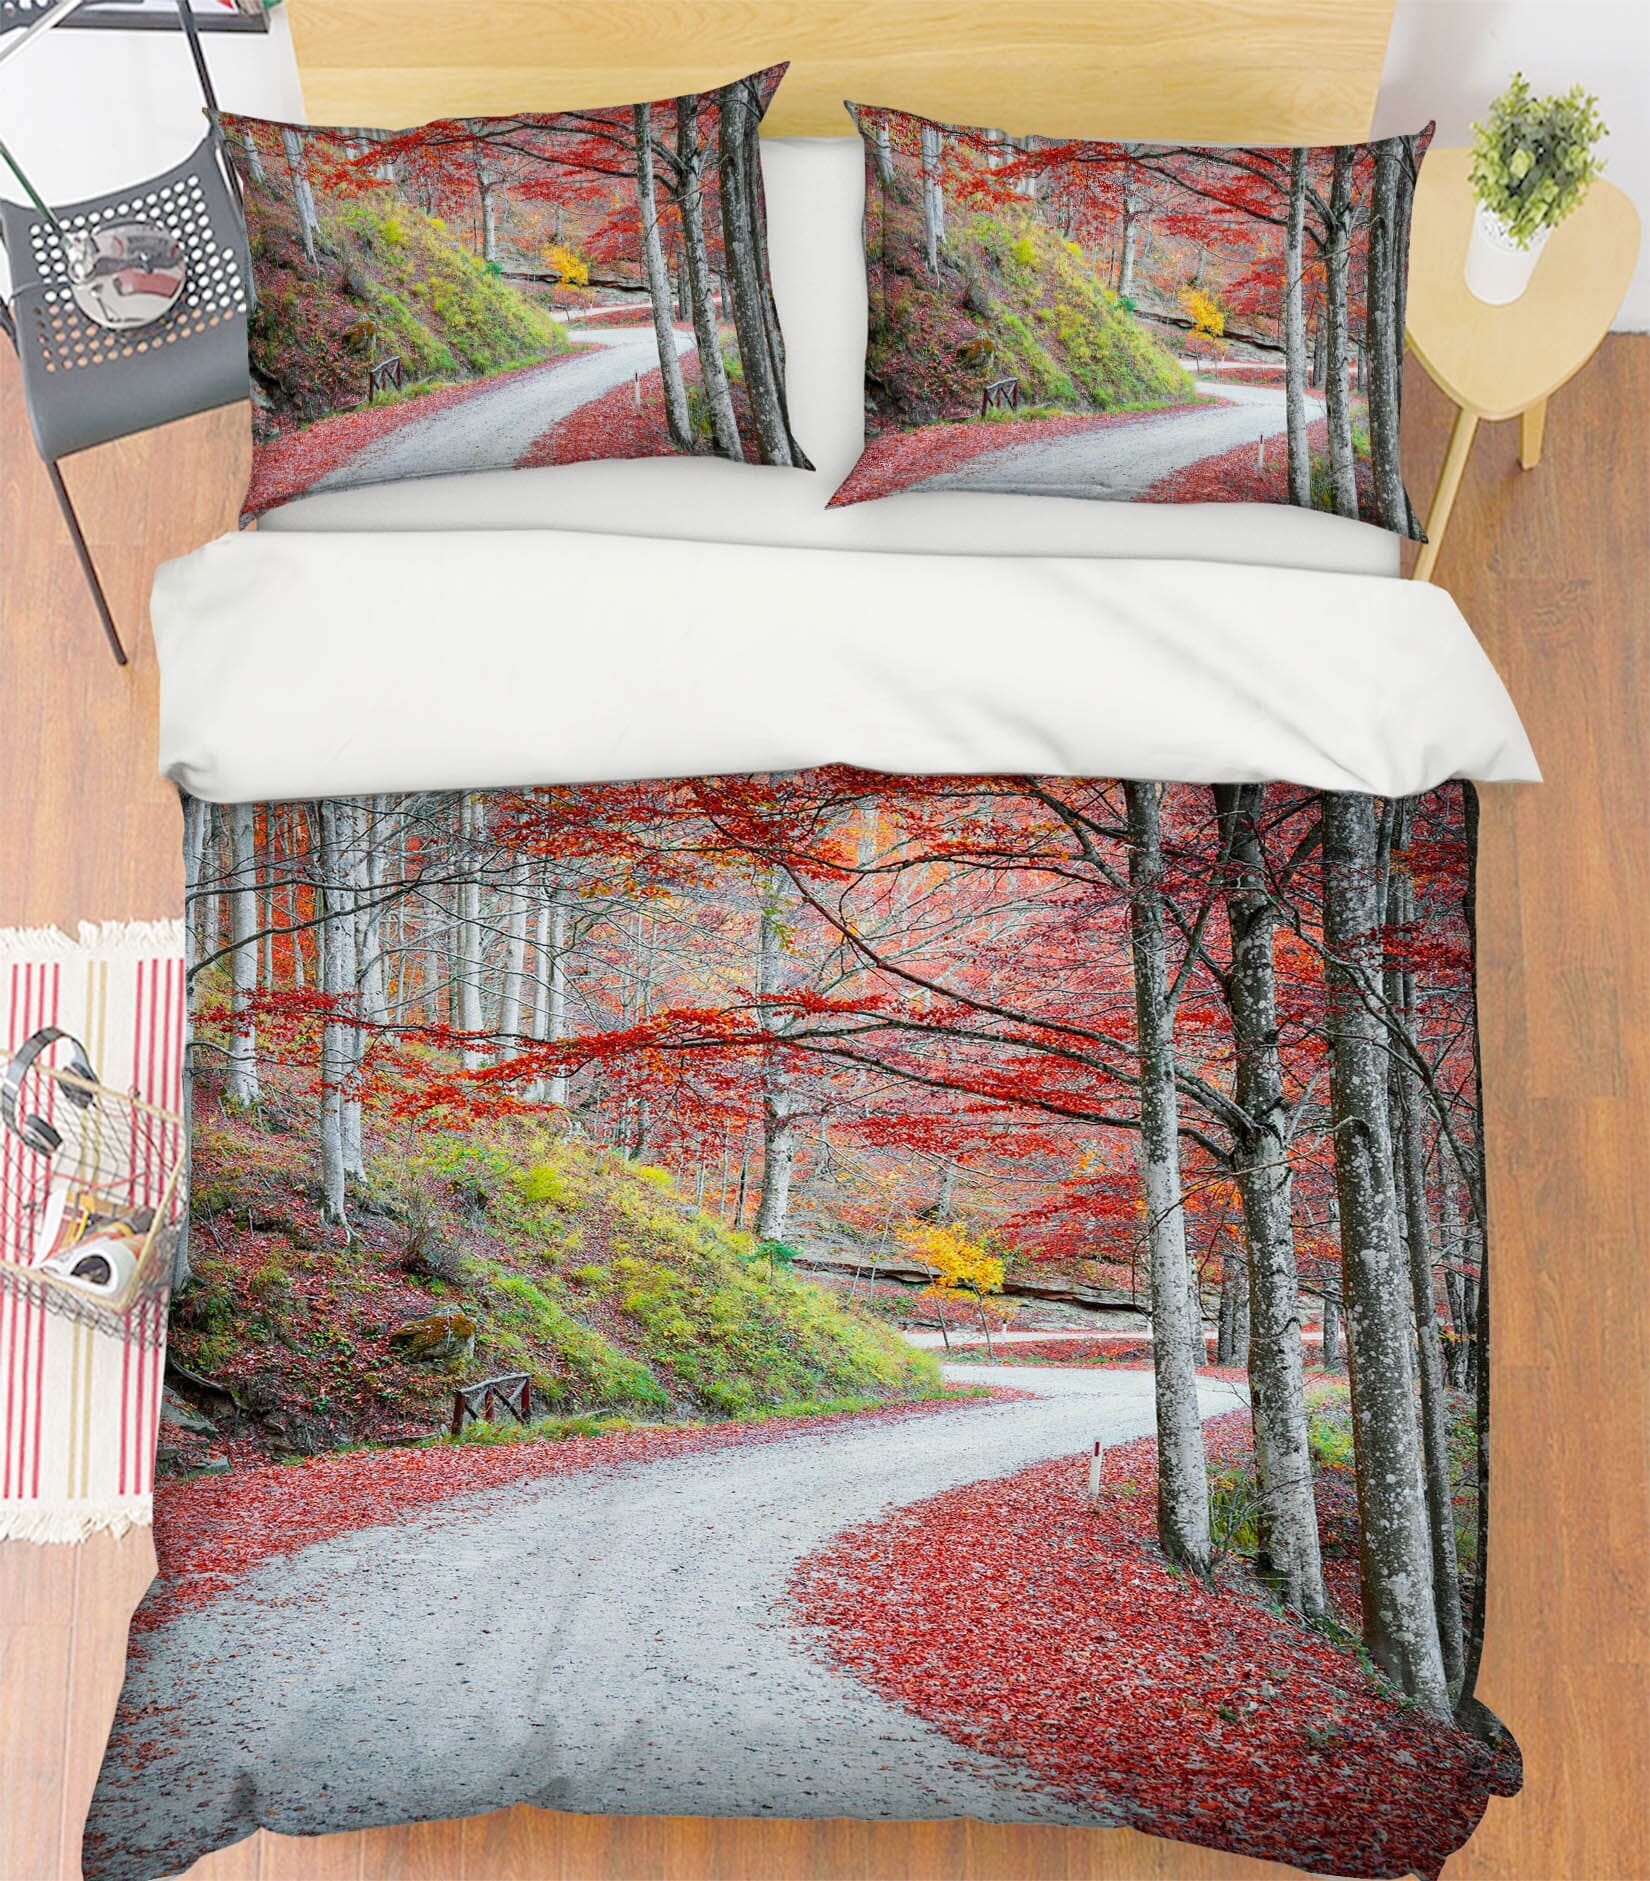 3D Maple Trail 2105 Marco Carmassi Bedding Bed Pillowcases Quilt Quiet Covers AJ Creativity Home 